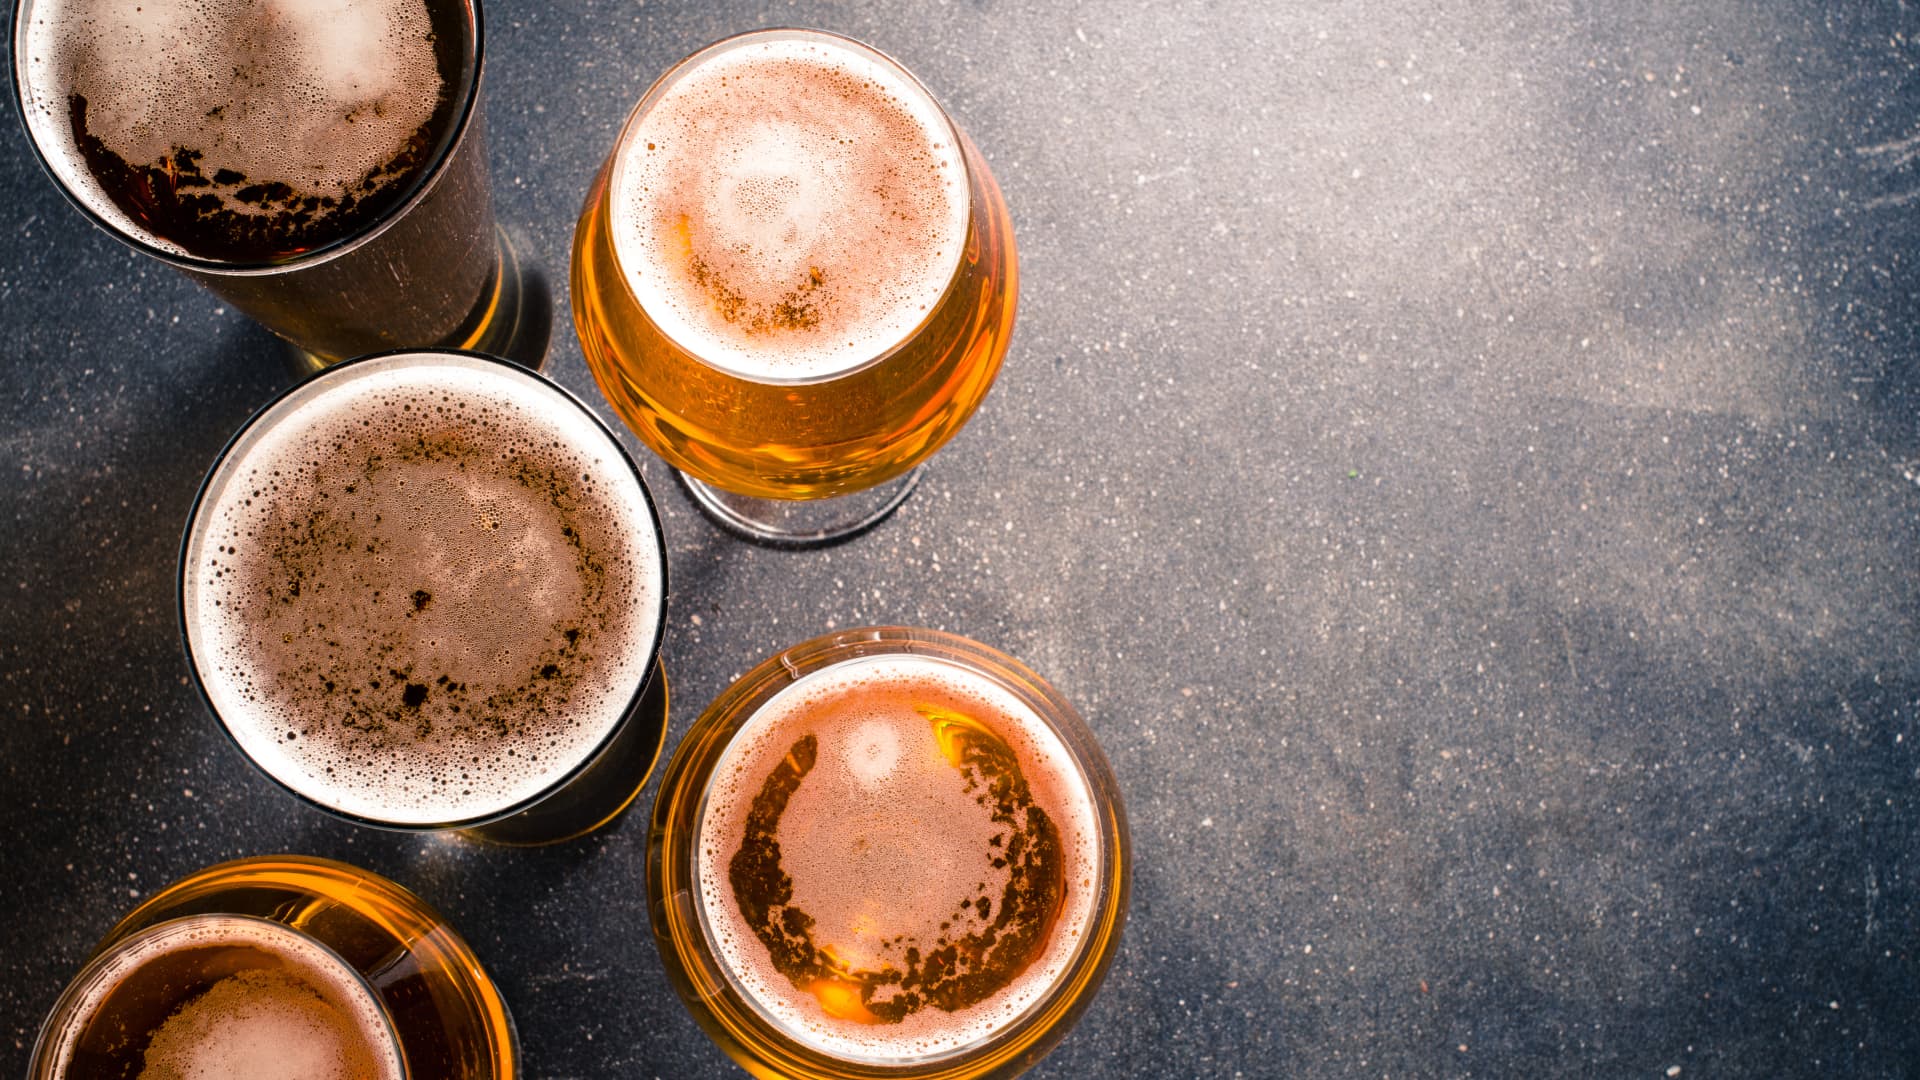 The rise of the  pint: Why beer prices are going up